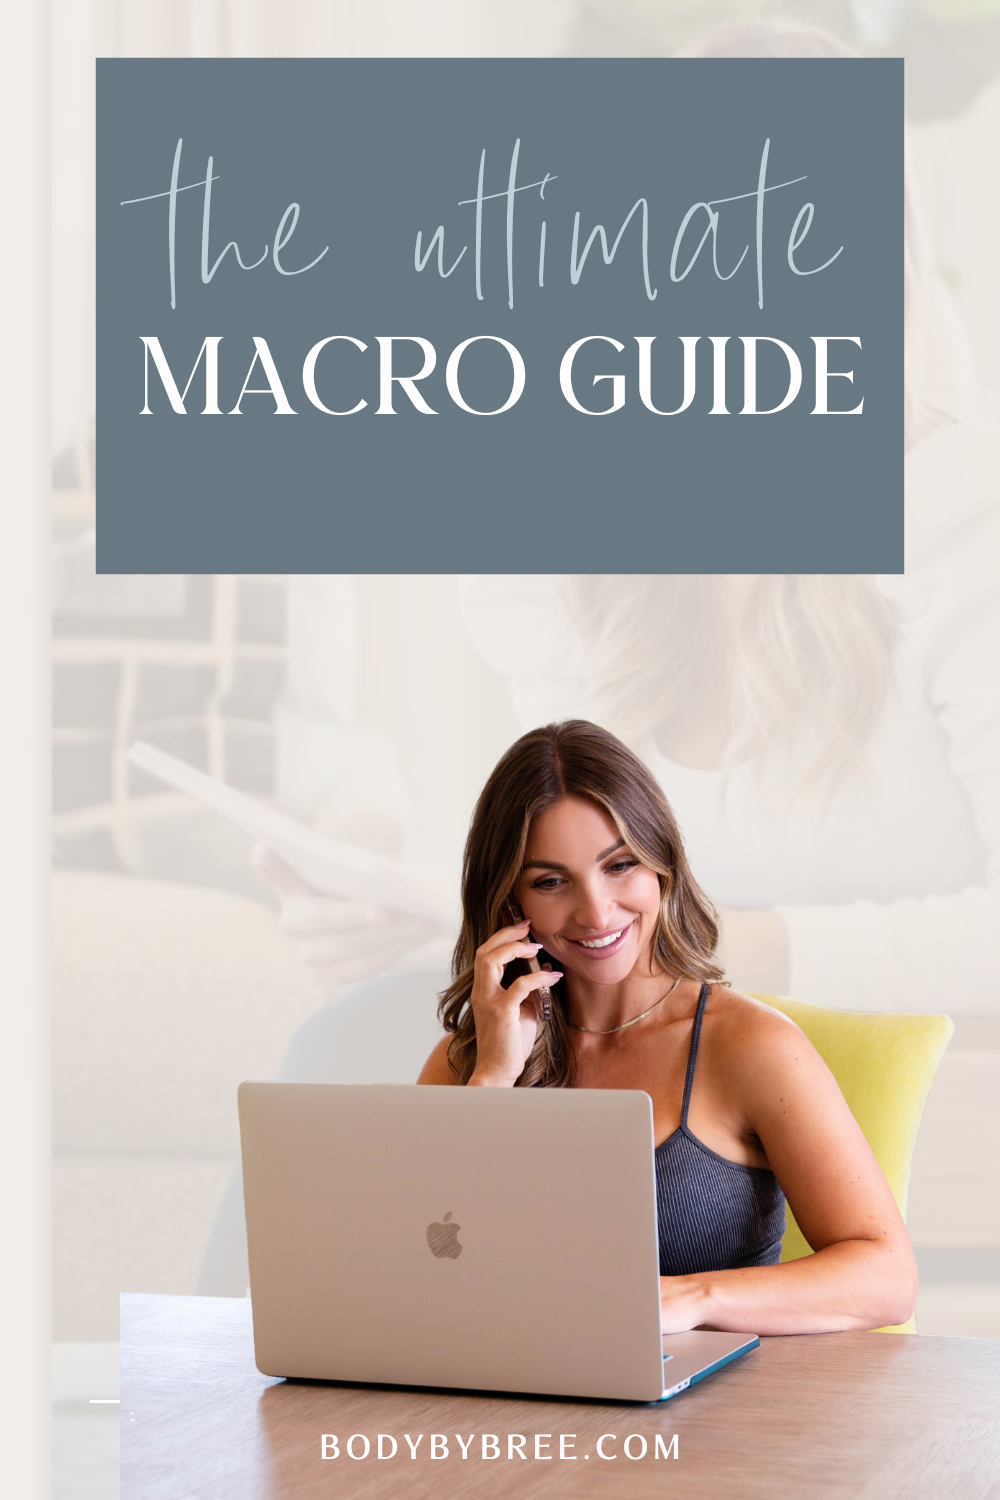 FUELING YOUR FITNESS: THE ULTIMATE MARCO GUIDE FOR WOMEN'S FAT LOSS AND MUSCLE DEFINITION